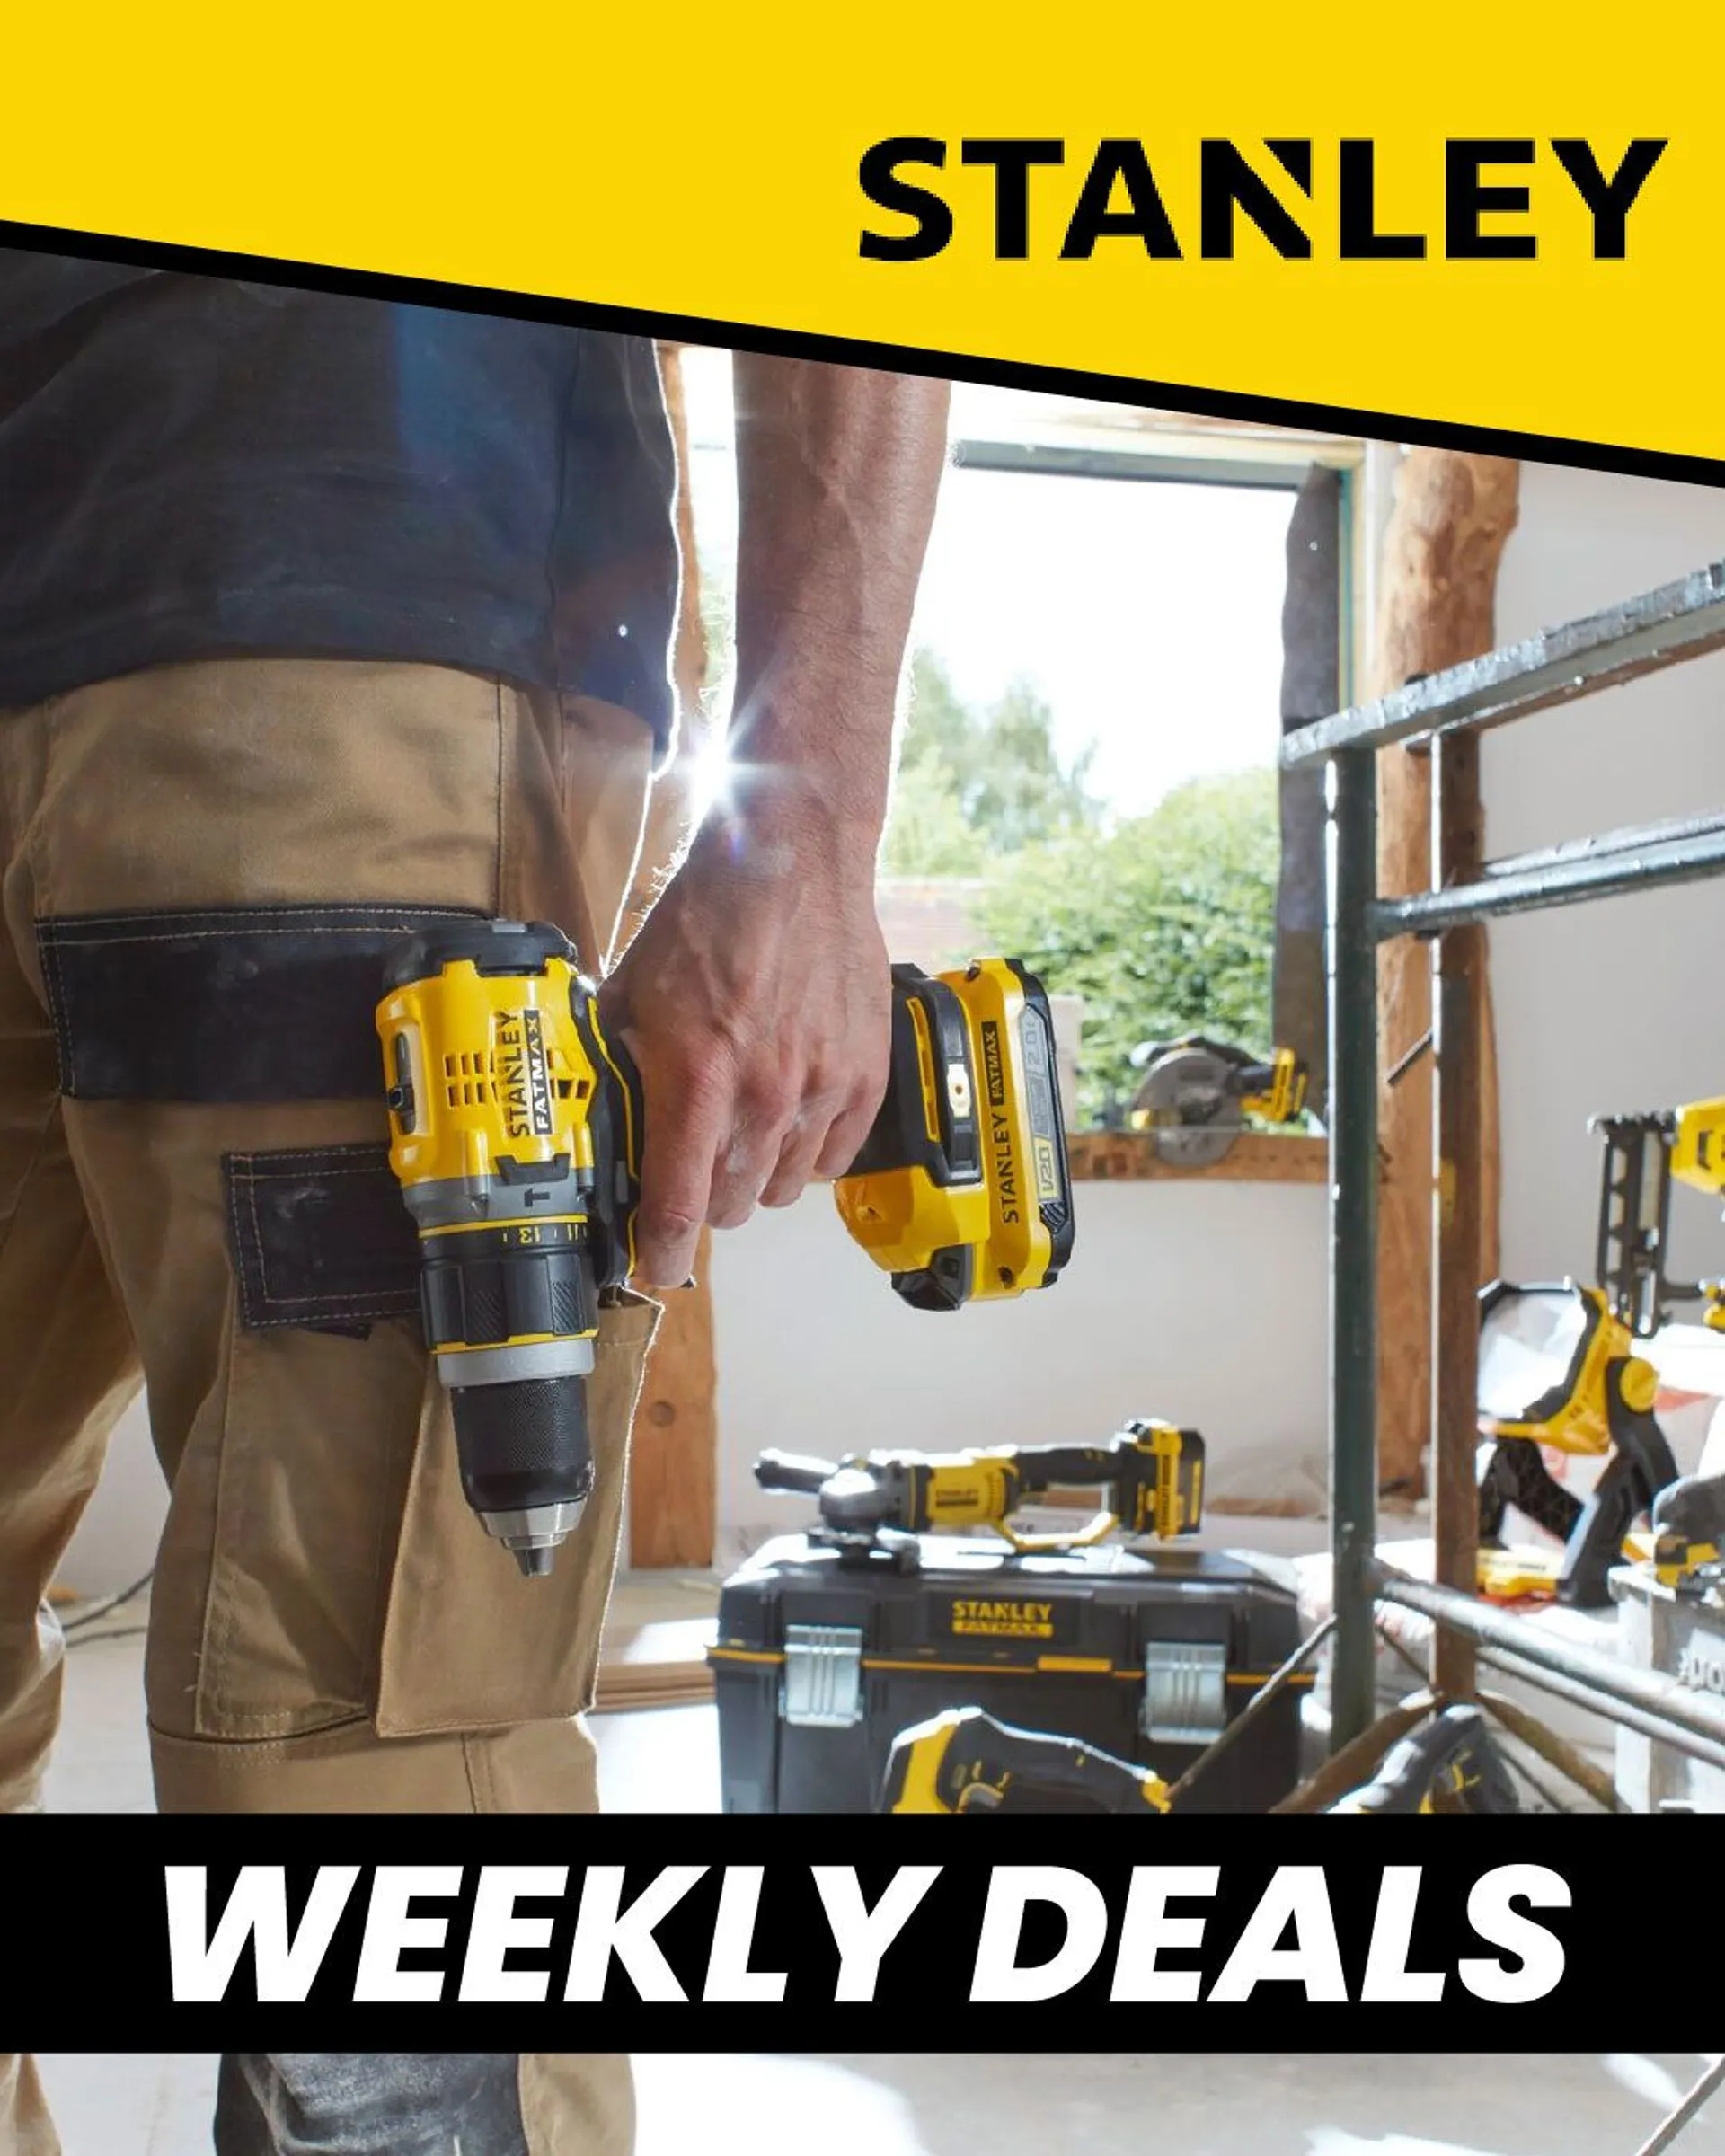 Weekly ad Stanley - Weekly Deals  from January 22 to January 27 2023 - Page 1